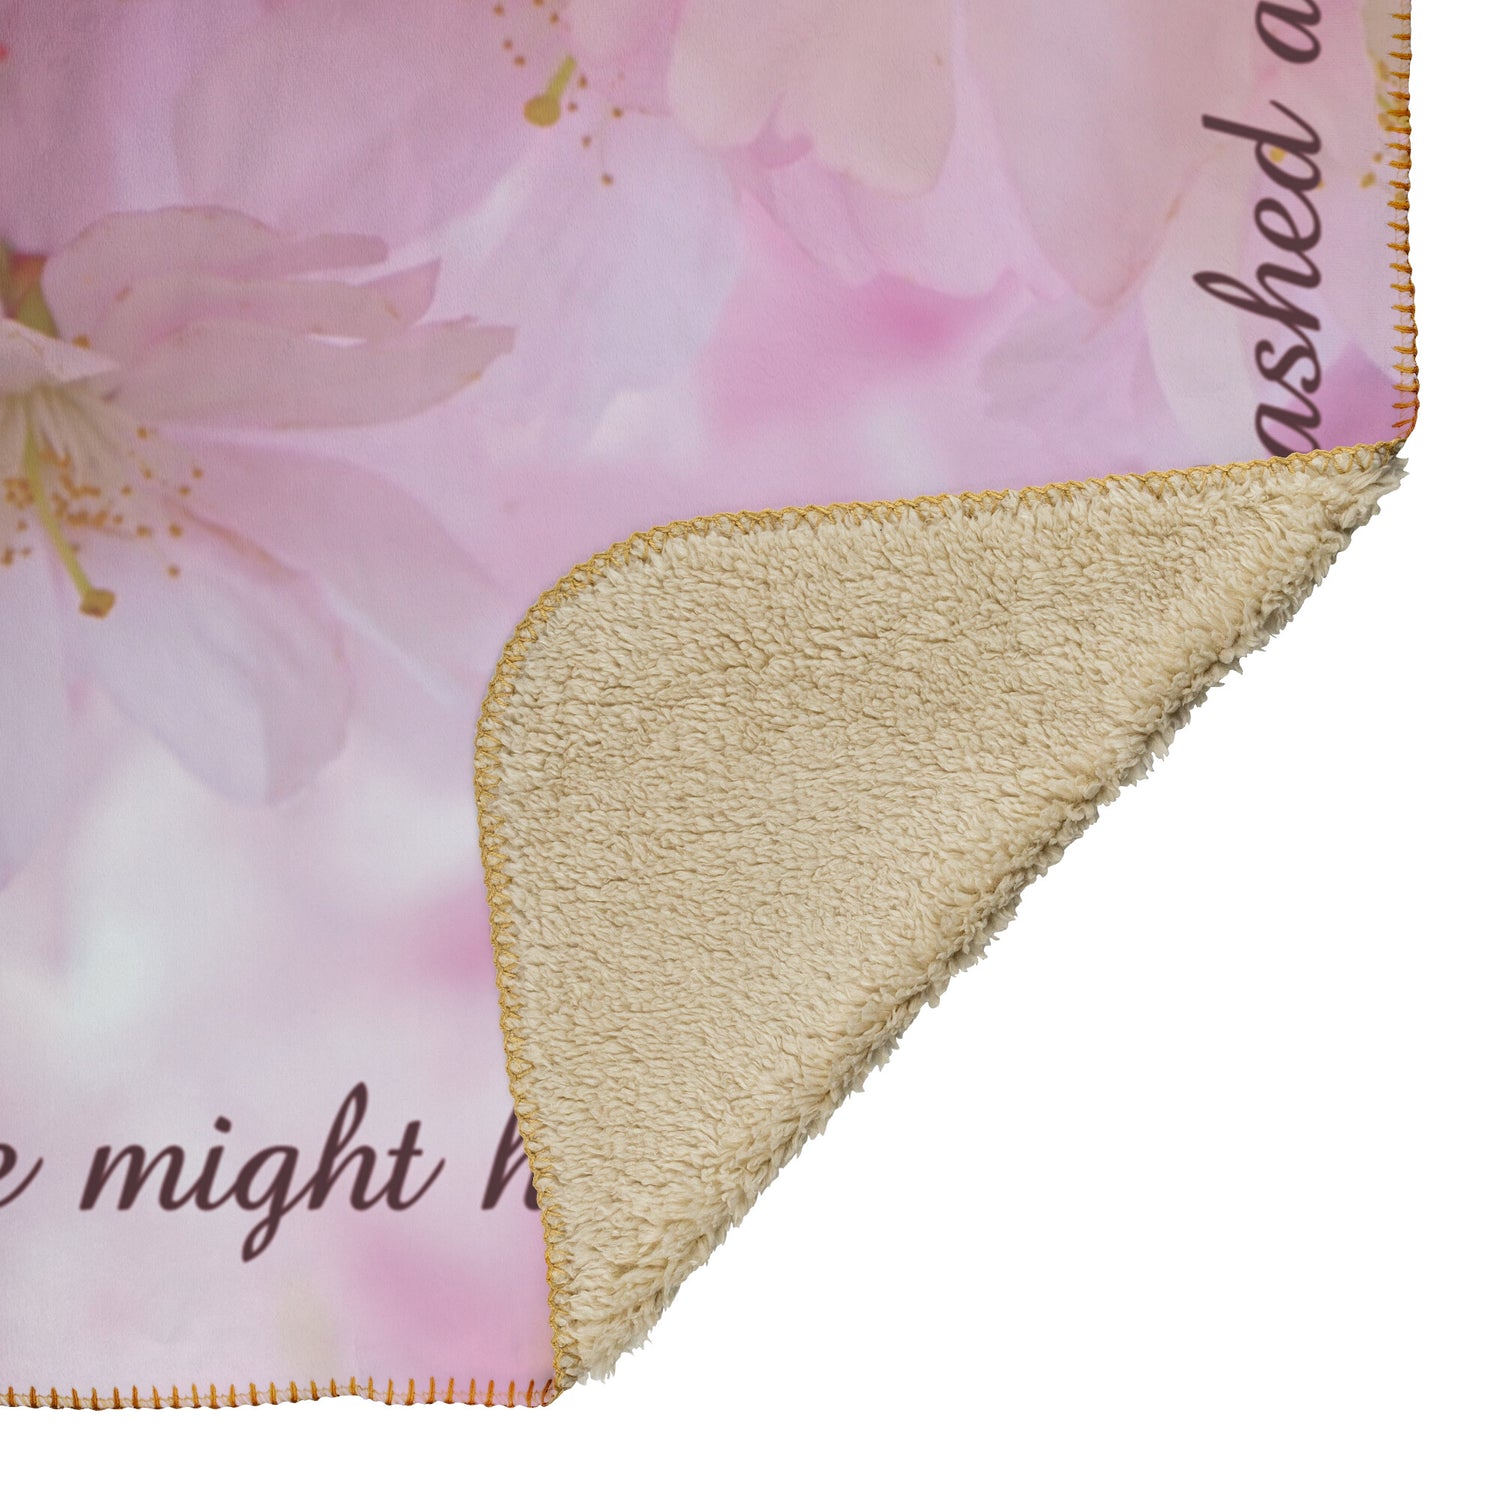 Healing Scripture with Spring Blossoms Fleece Blanket - Signs and Seasons Gifts